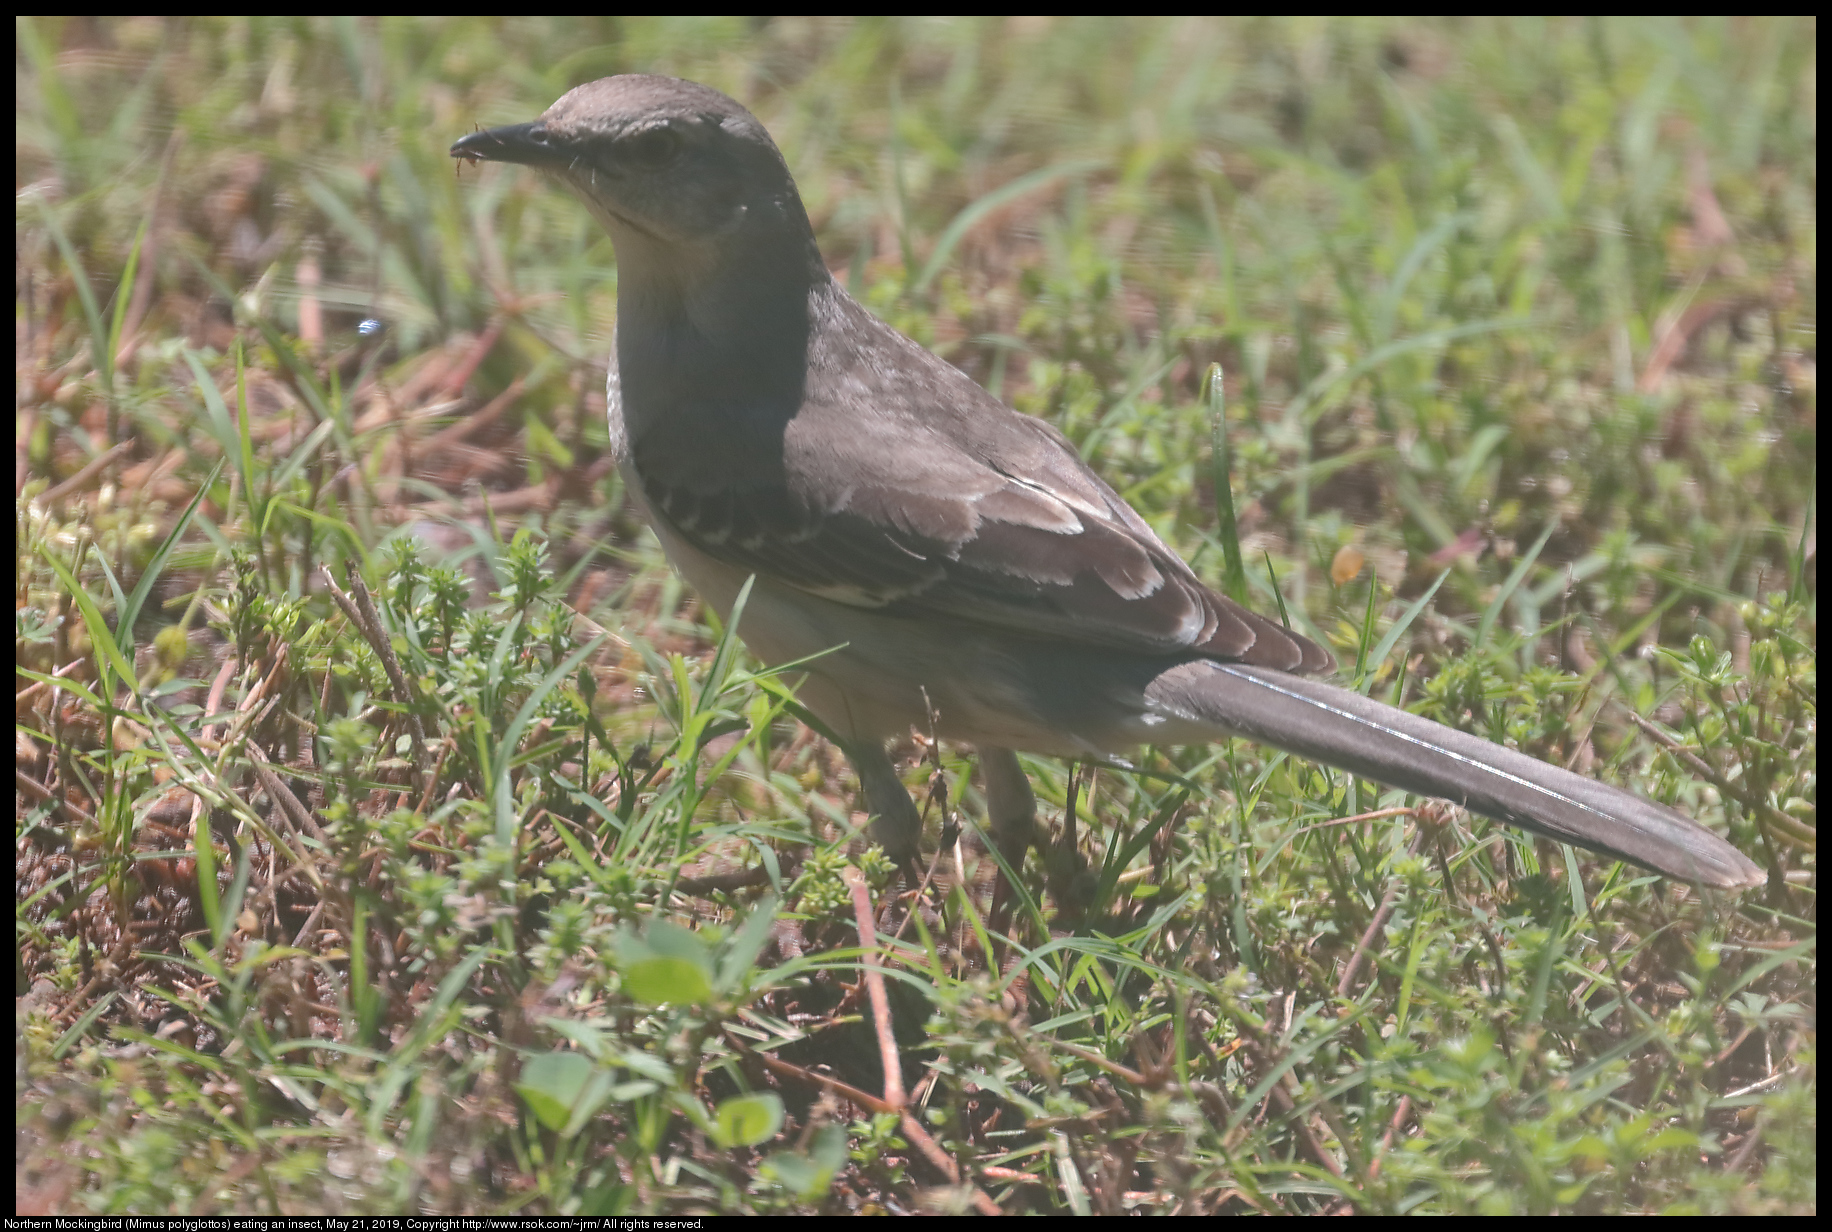 Northern Mockingbird (Mimus polyglottos) eating an insect, May 21, 2019